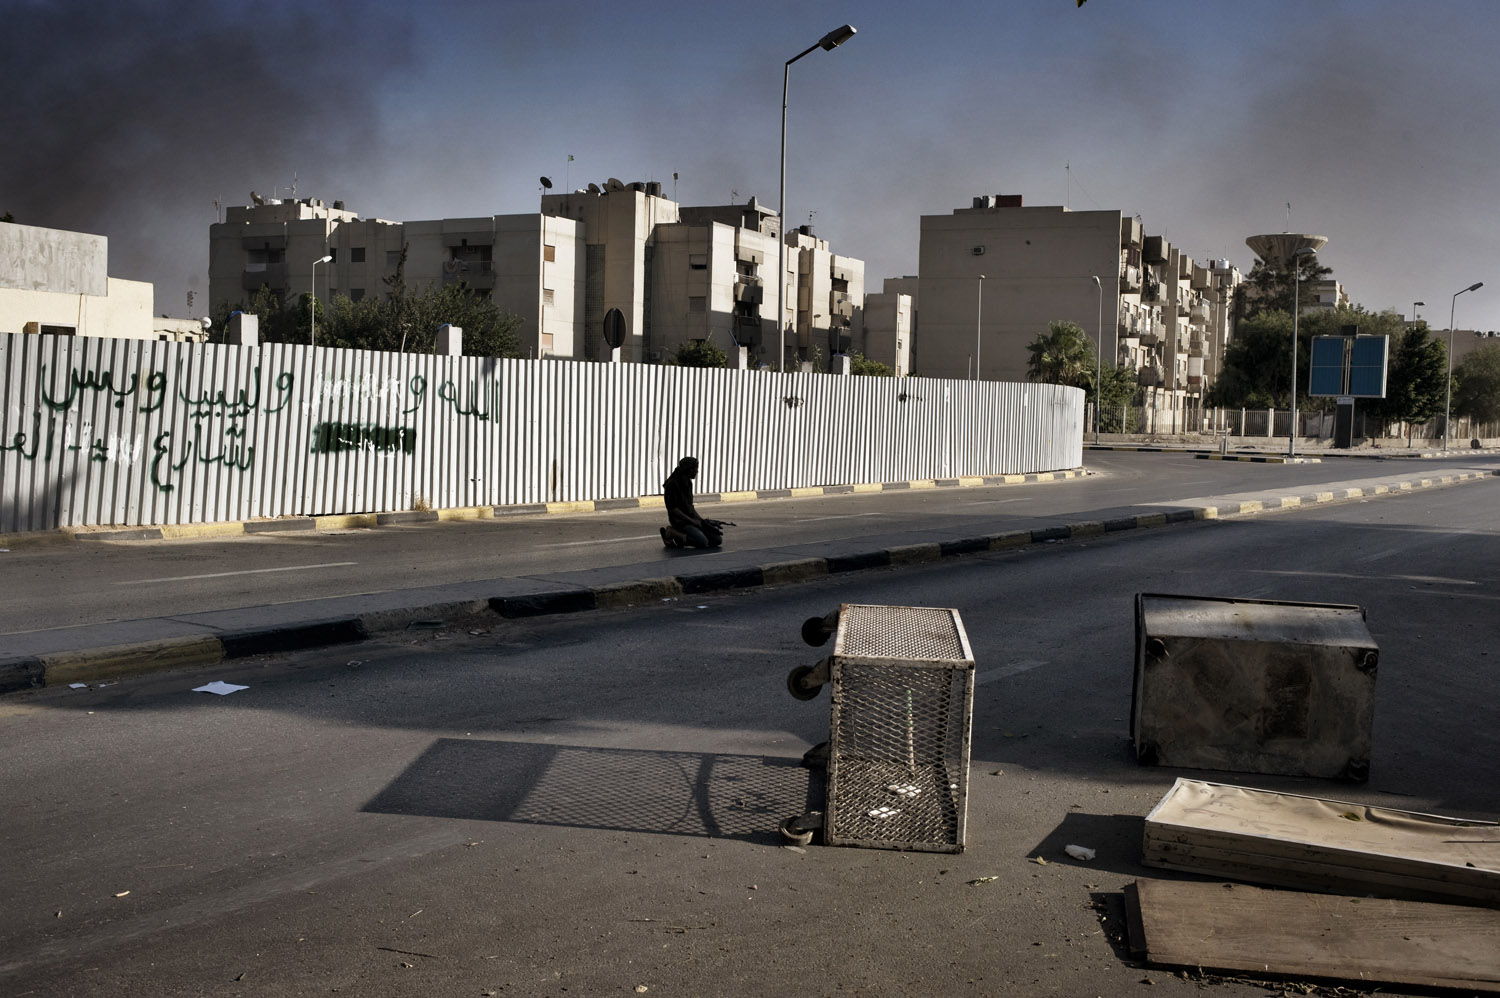 A Libyan rebel soldier prays as smoke from burning buildings fills the air in Tripoli, August 25, 2011.